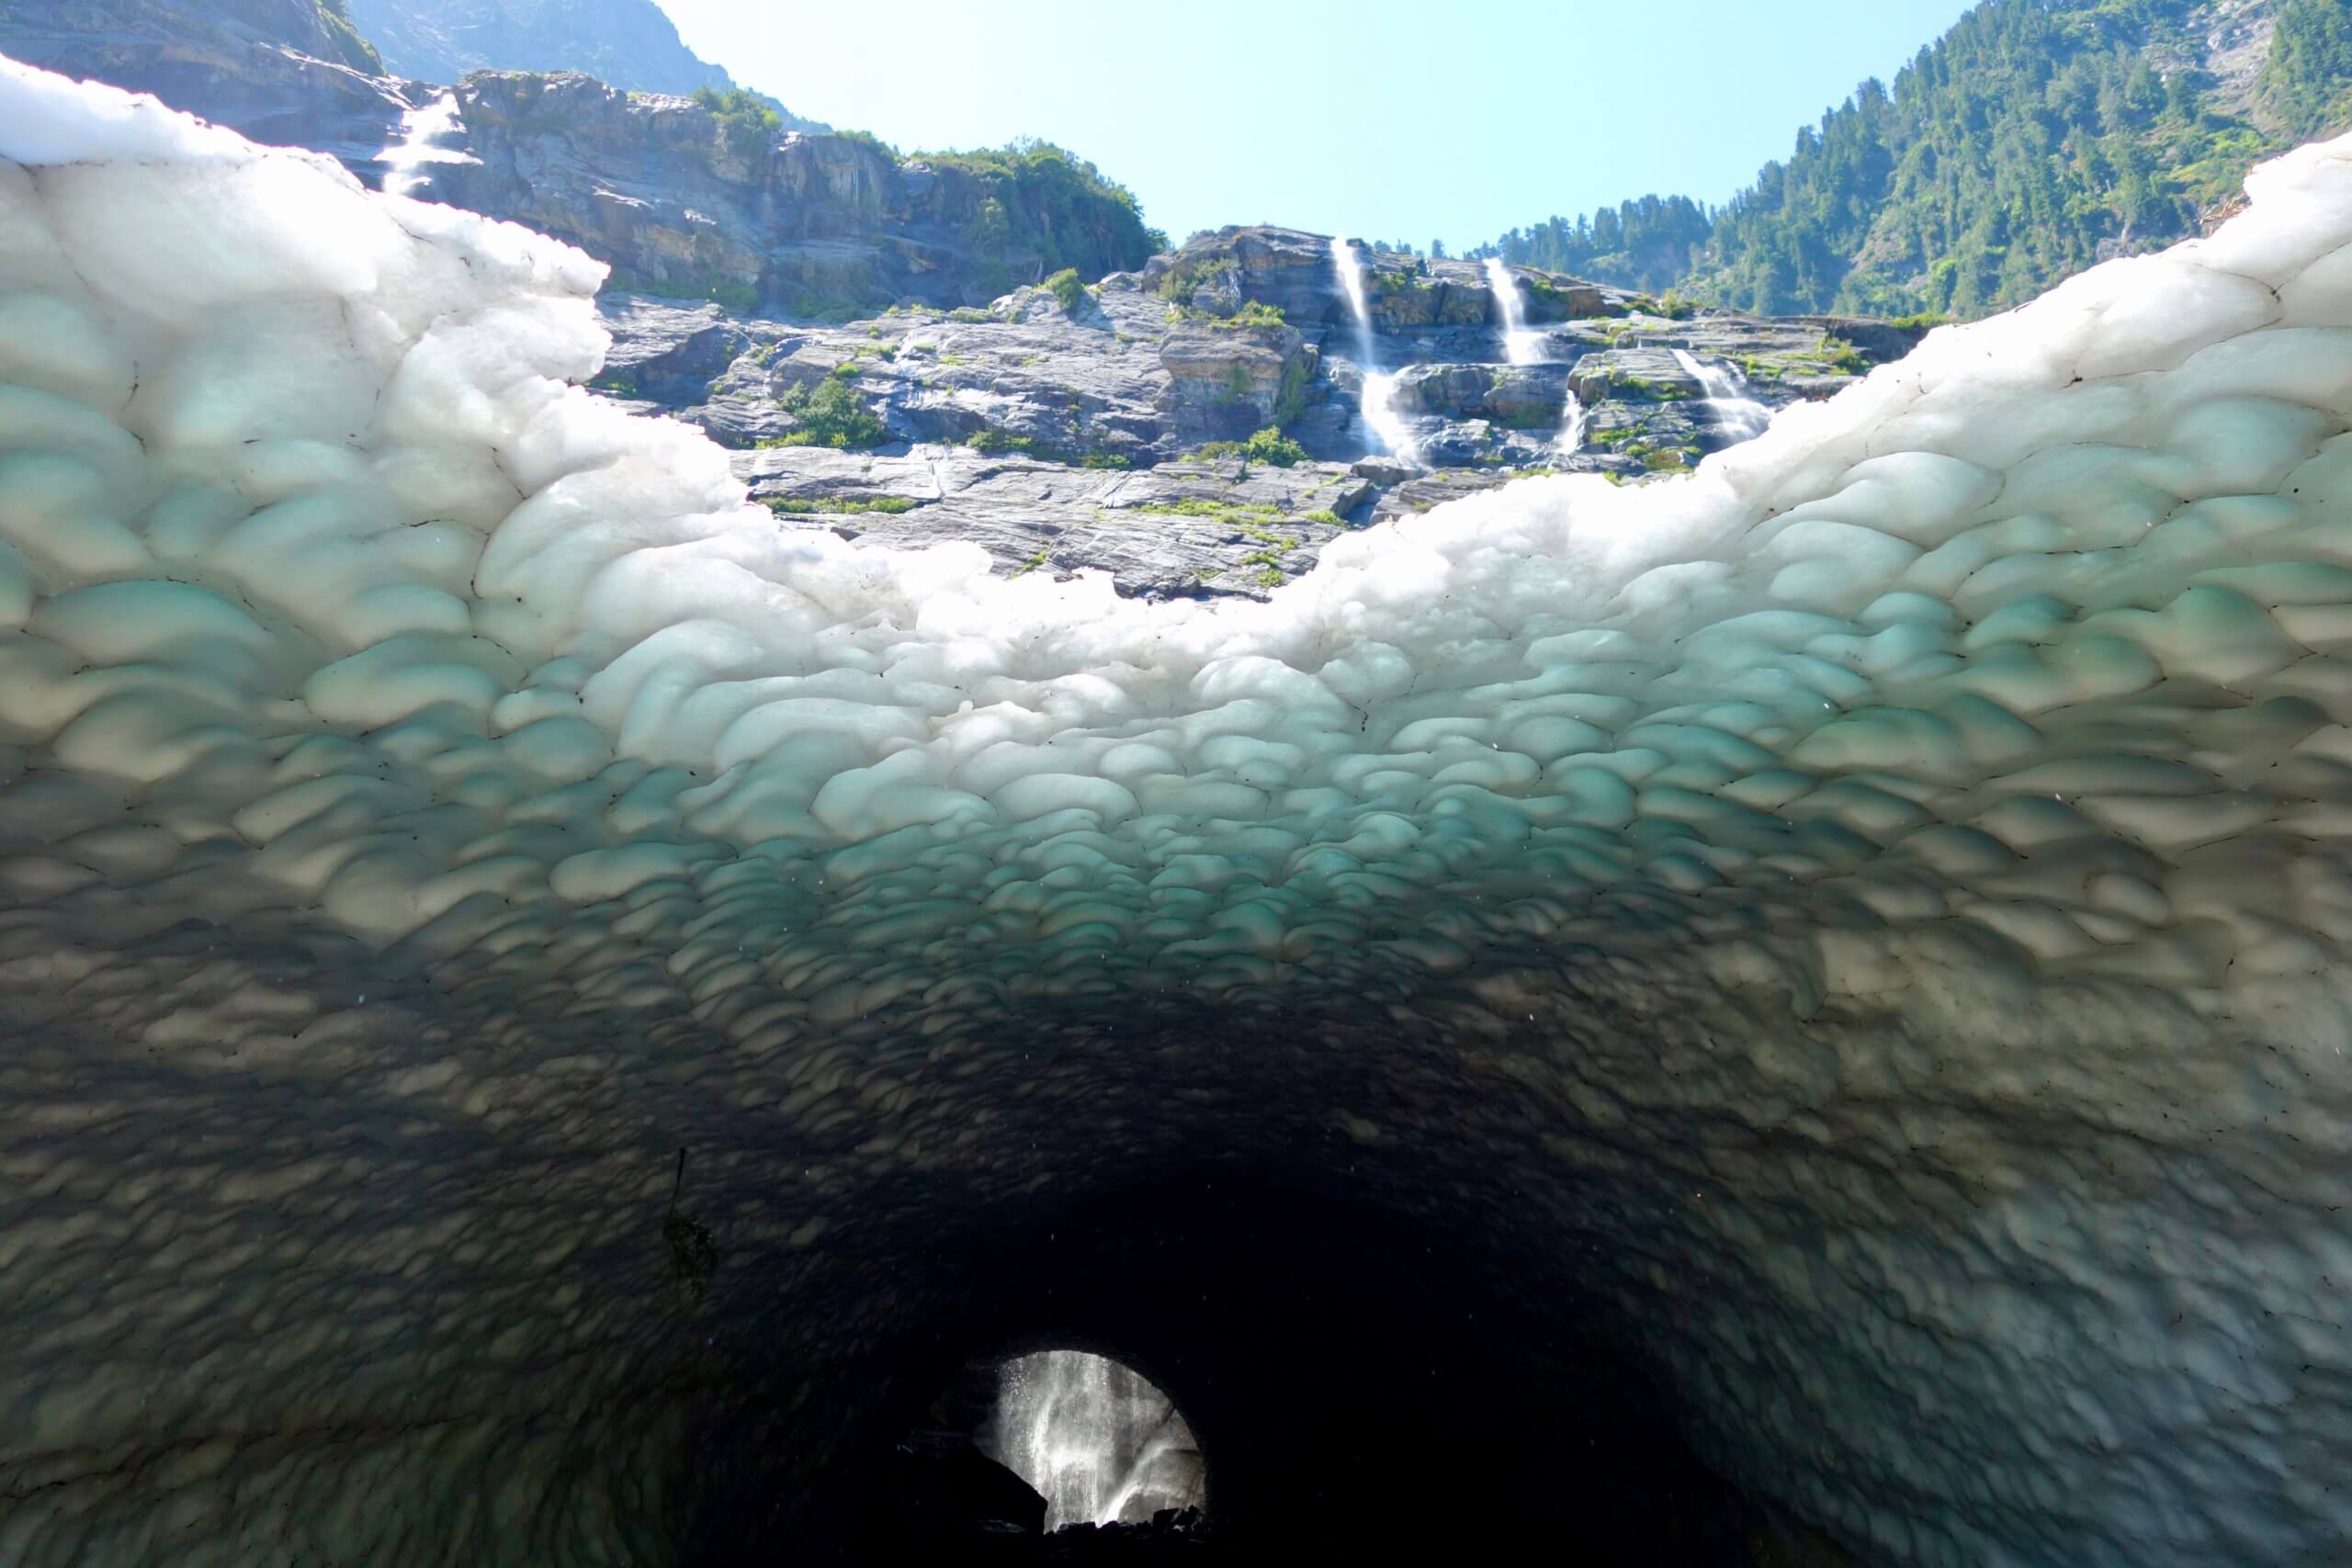 One of the impressive ice caves at Big Four Ice Caves showcases the towering mountains with waterfalls cascading down the chucks of rock amongst green shrubs. The ice cave has a waterfall in the background and the ceiling of the cave has many divers from the melting ice.